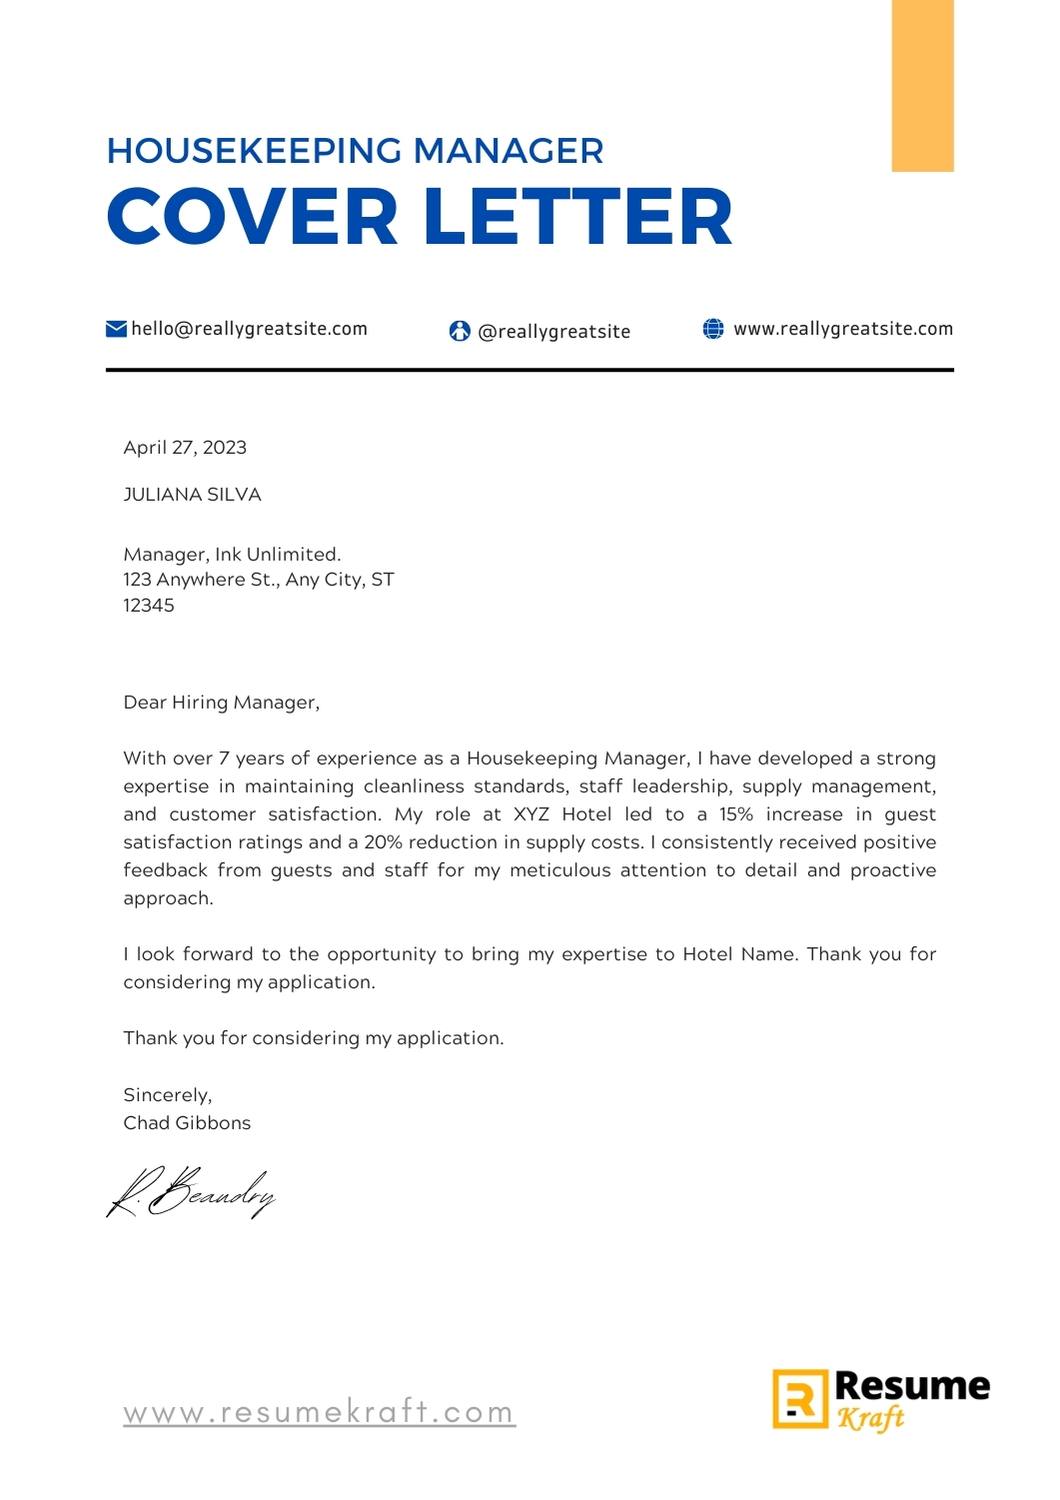 sample cover letter as housekeeping